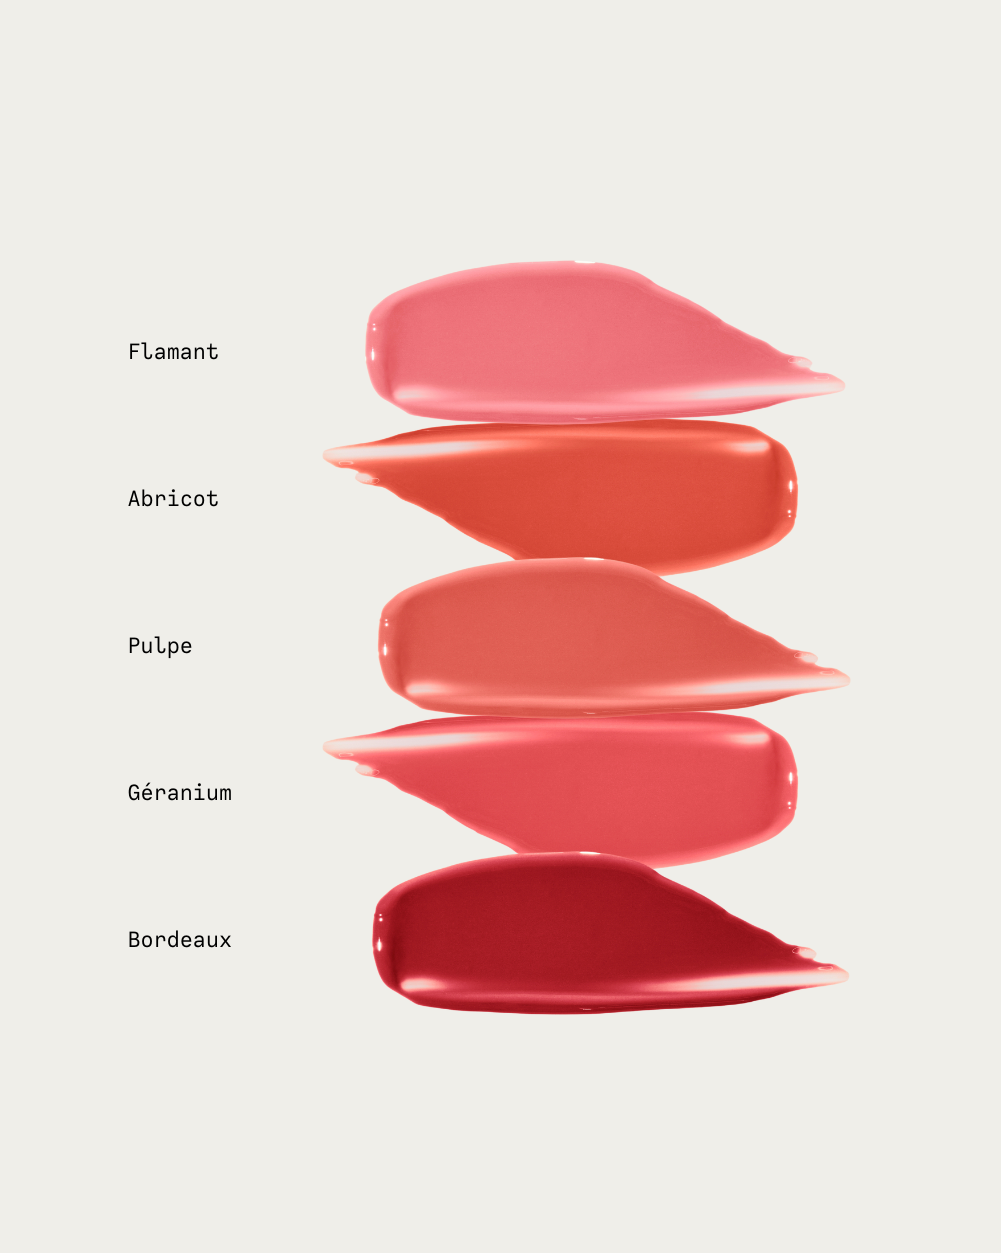 SWATCHES_582c3ecf-8143-4217-8165-157c948bf909.png